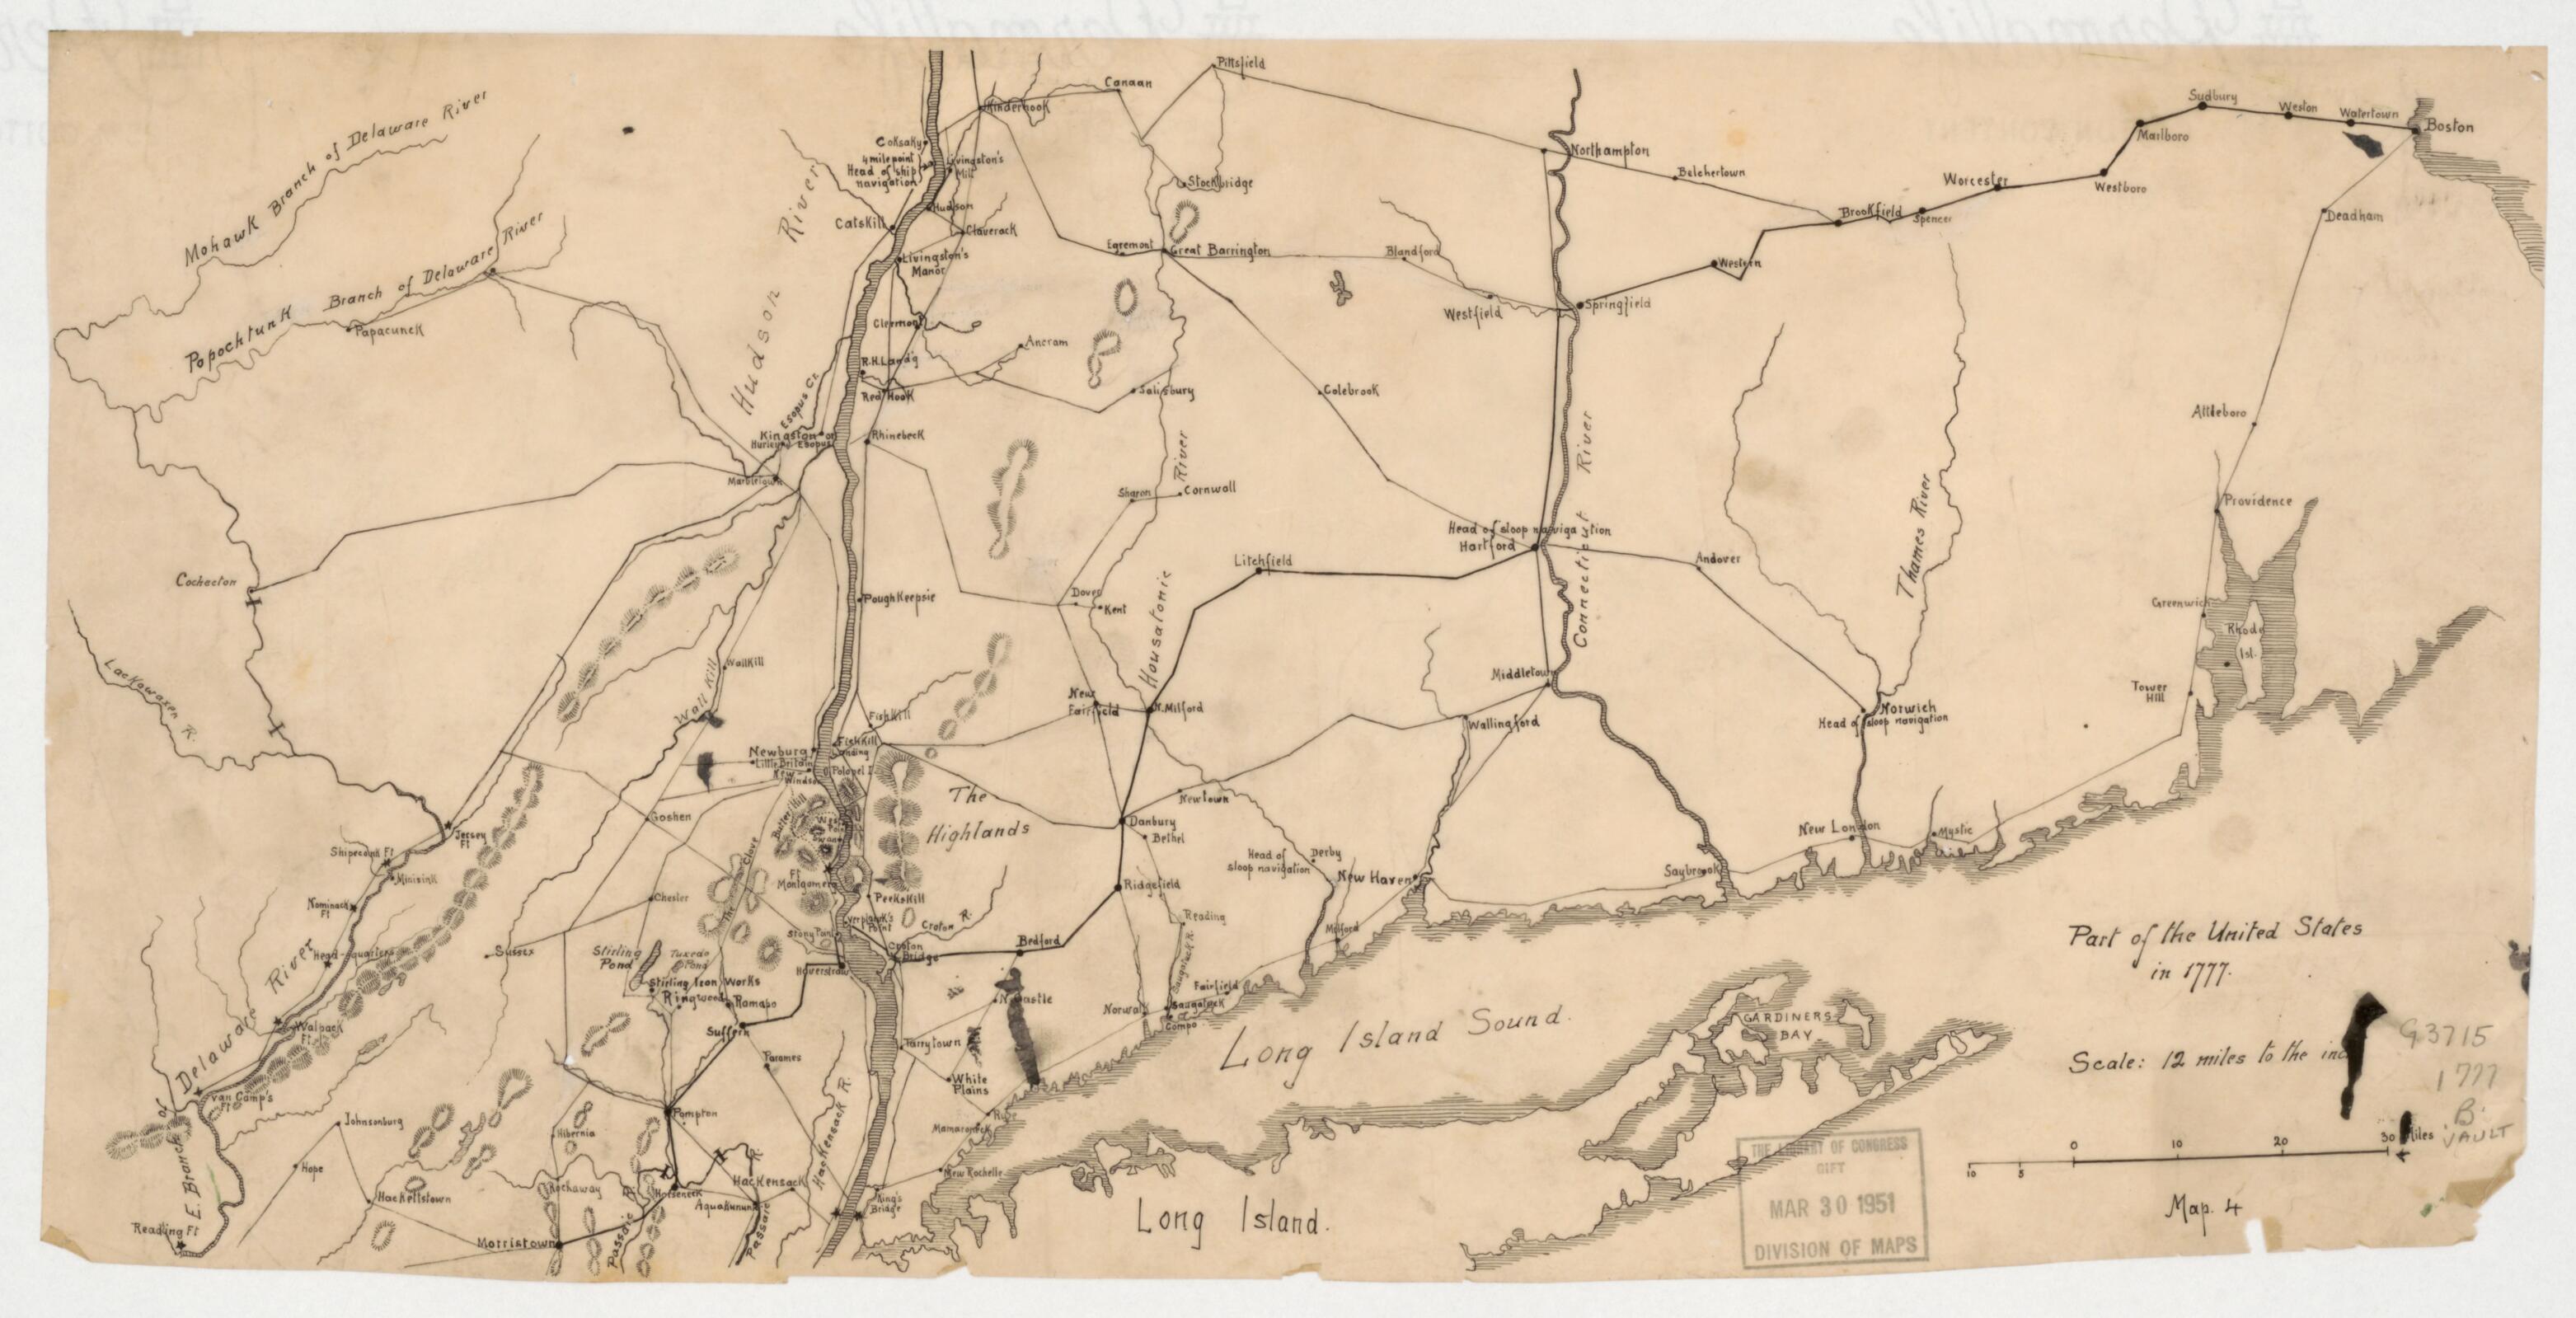 This old map of Part of the United States In 1777 from 1910 was created by John Bigelow in 1910